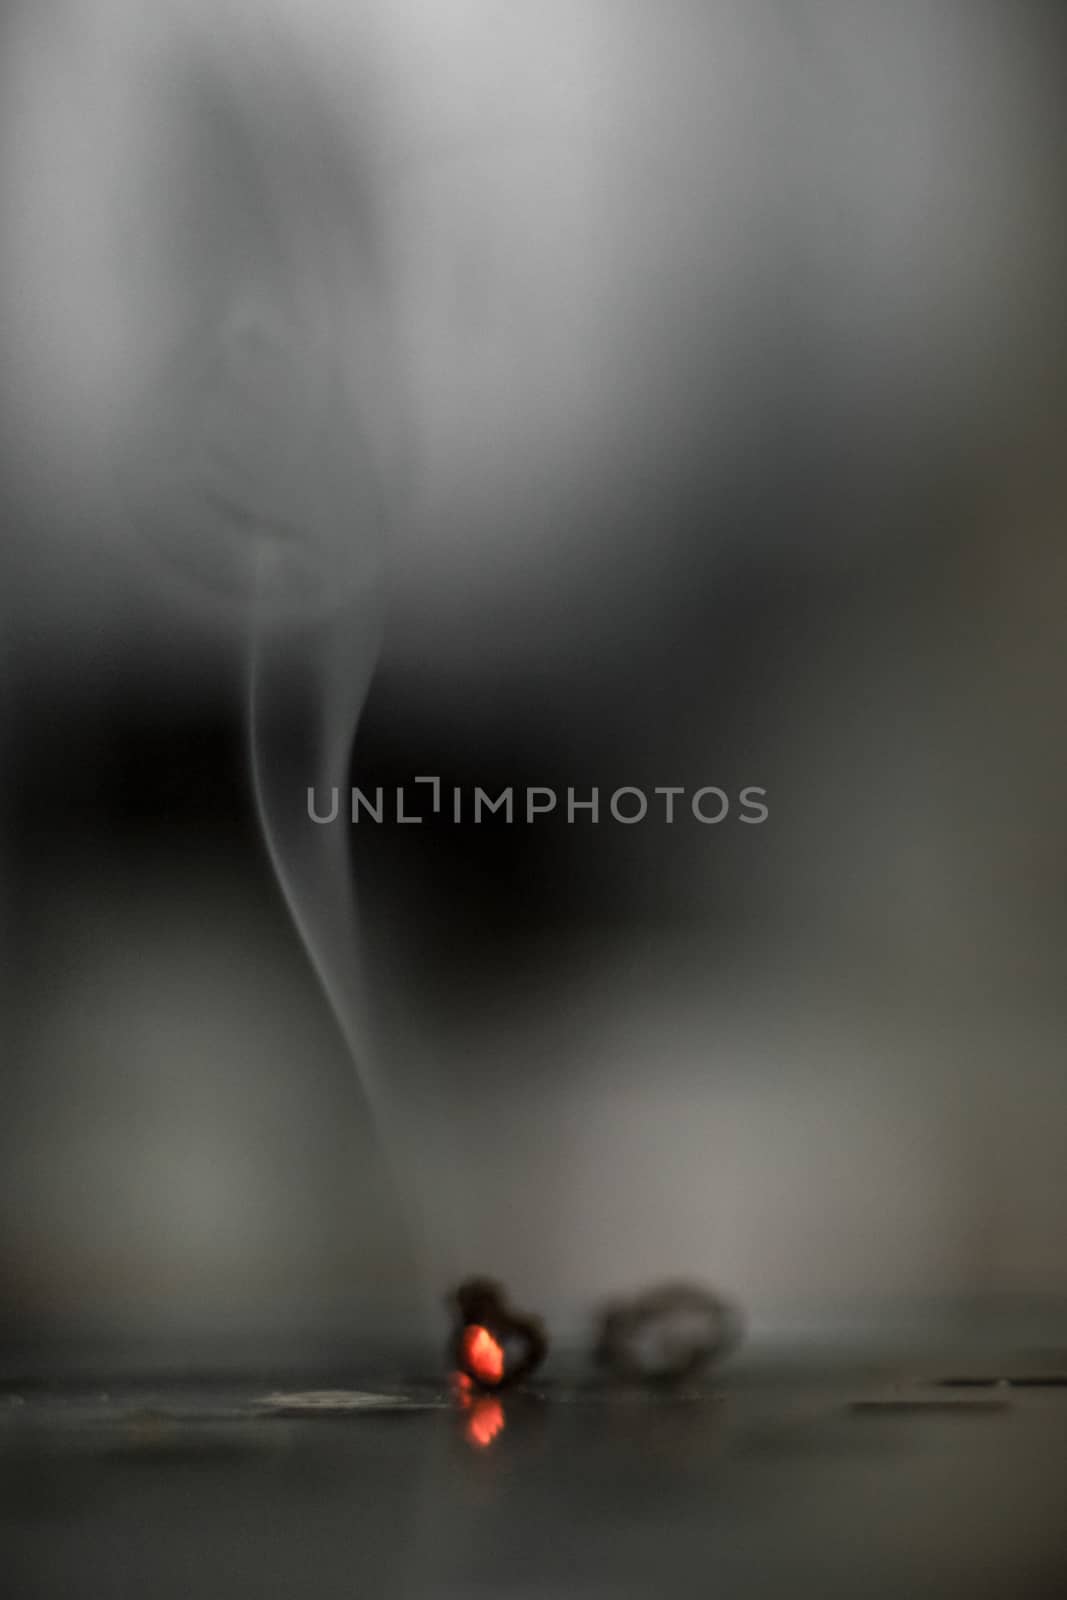 The smoke of a cigarette draws sinuous shapes in the air.